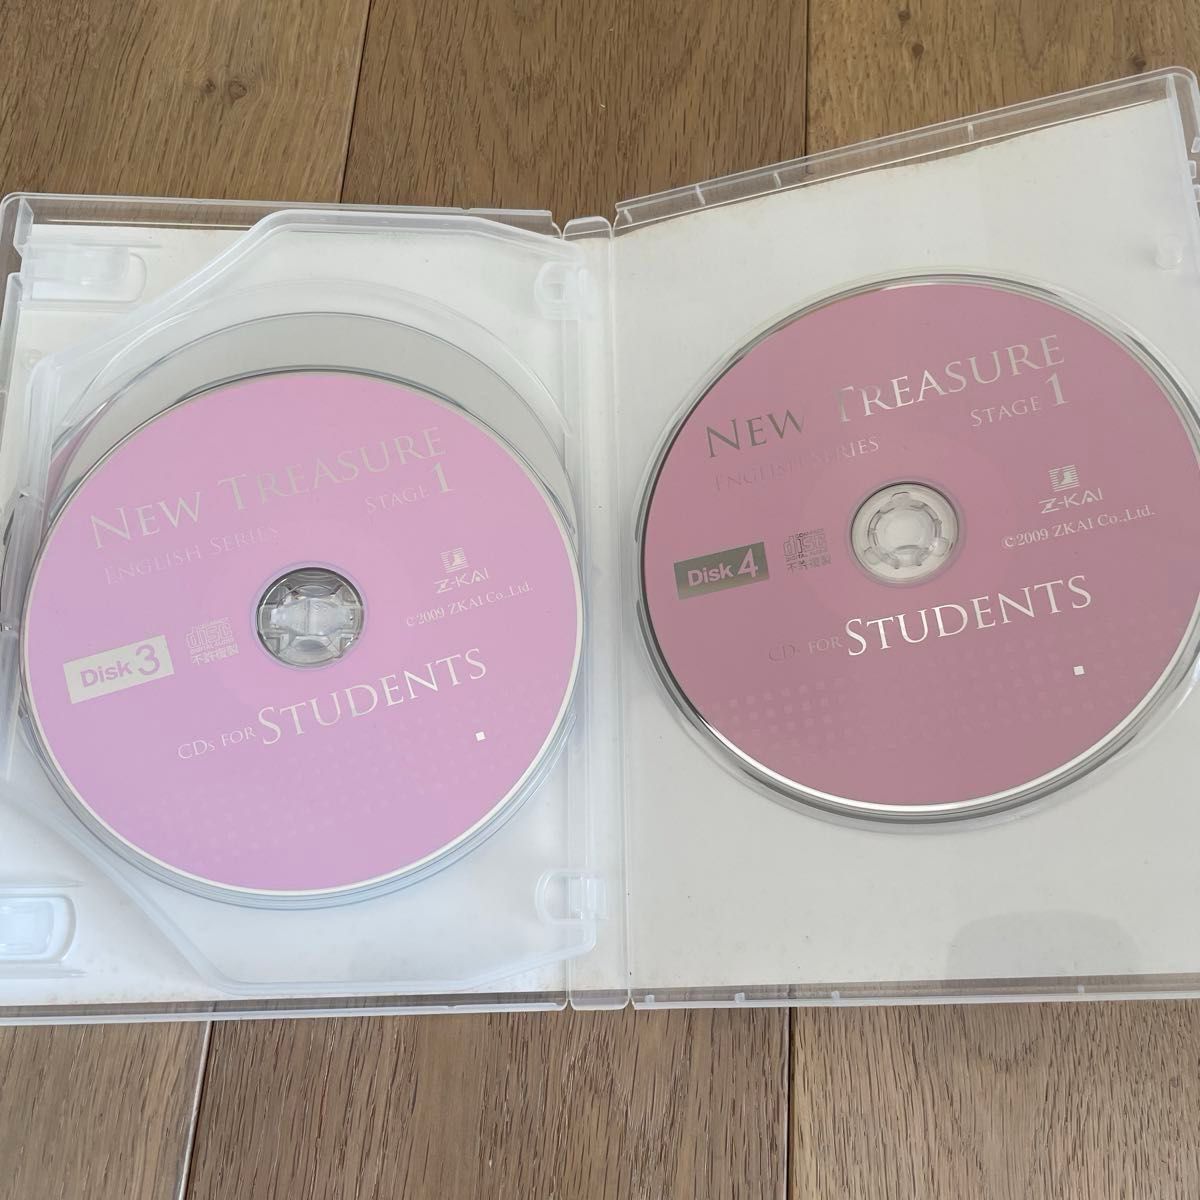 NEW TREASURE ENGLISH SERIES CDs FOR STUDENTS STAGE1 STAGE2 2種類